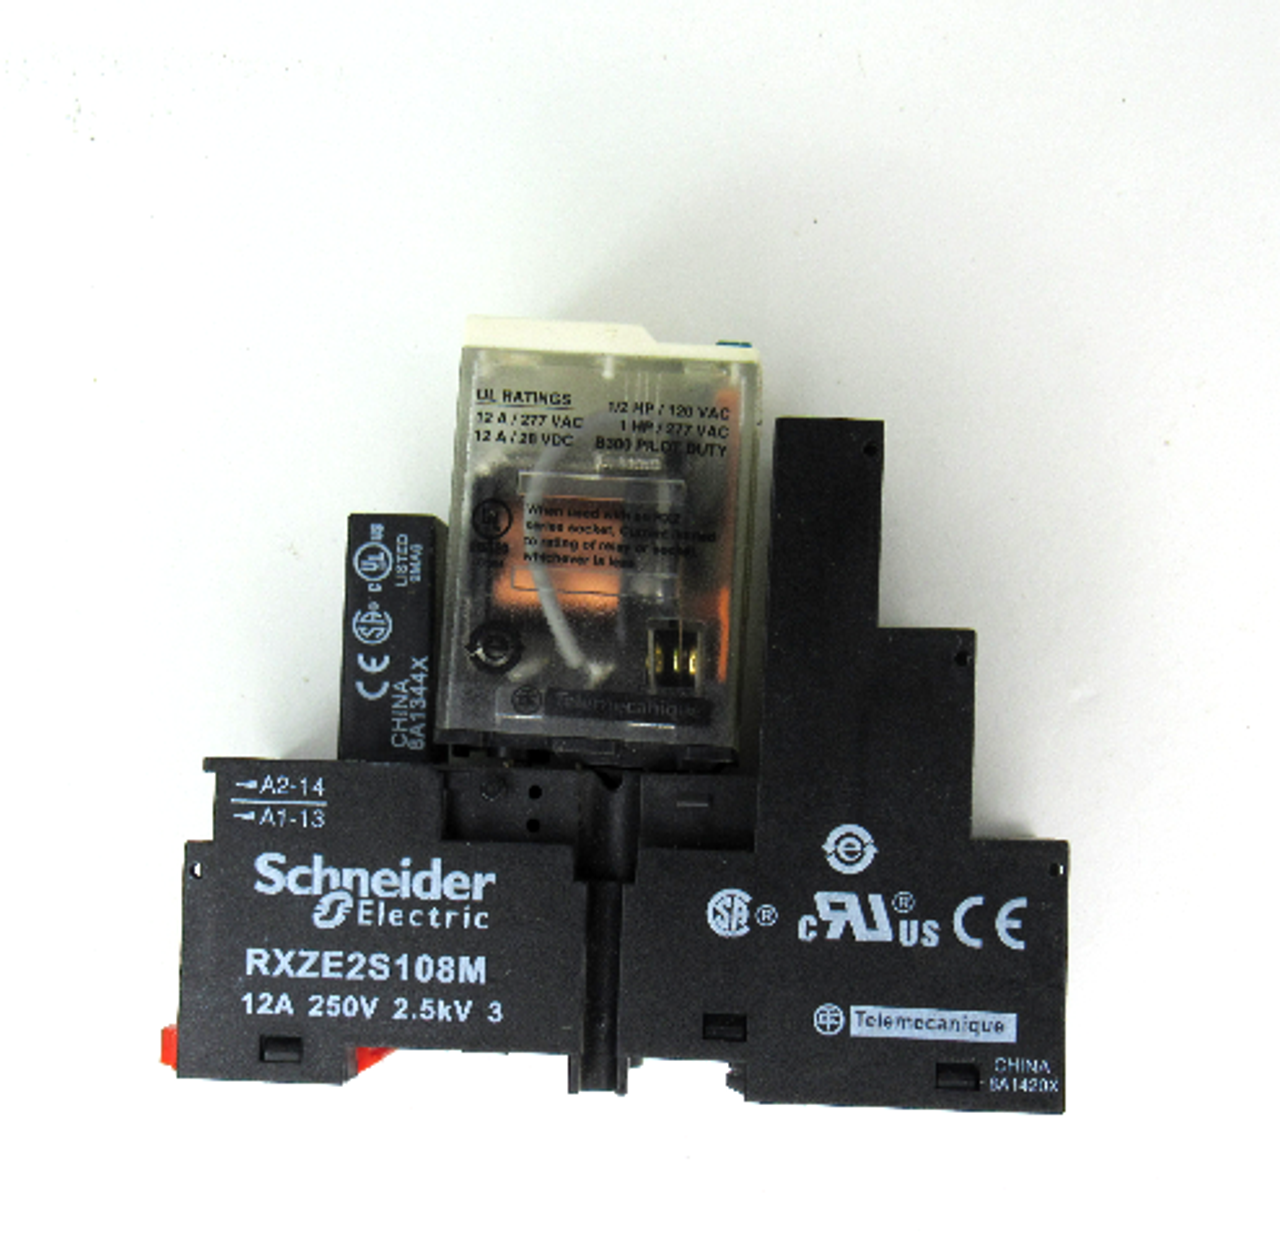 Schneider Electric RXM2AB1BD General Purpose Relay, with RXZE2S108M Relay Socket, 24V DC, 12A, 250V AC